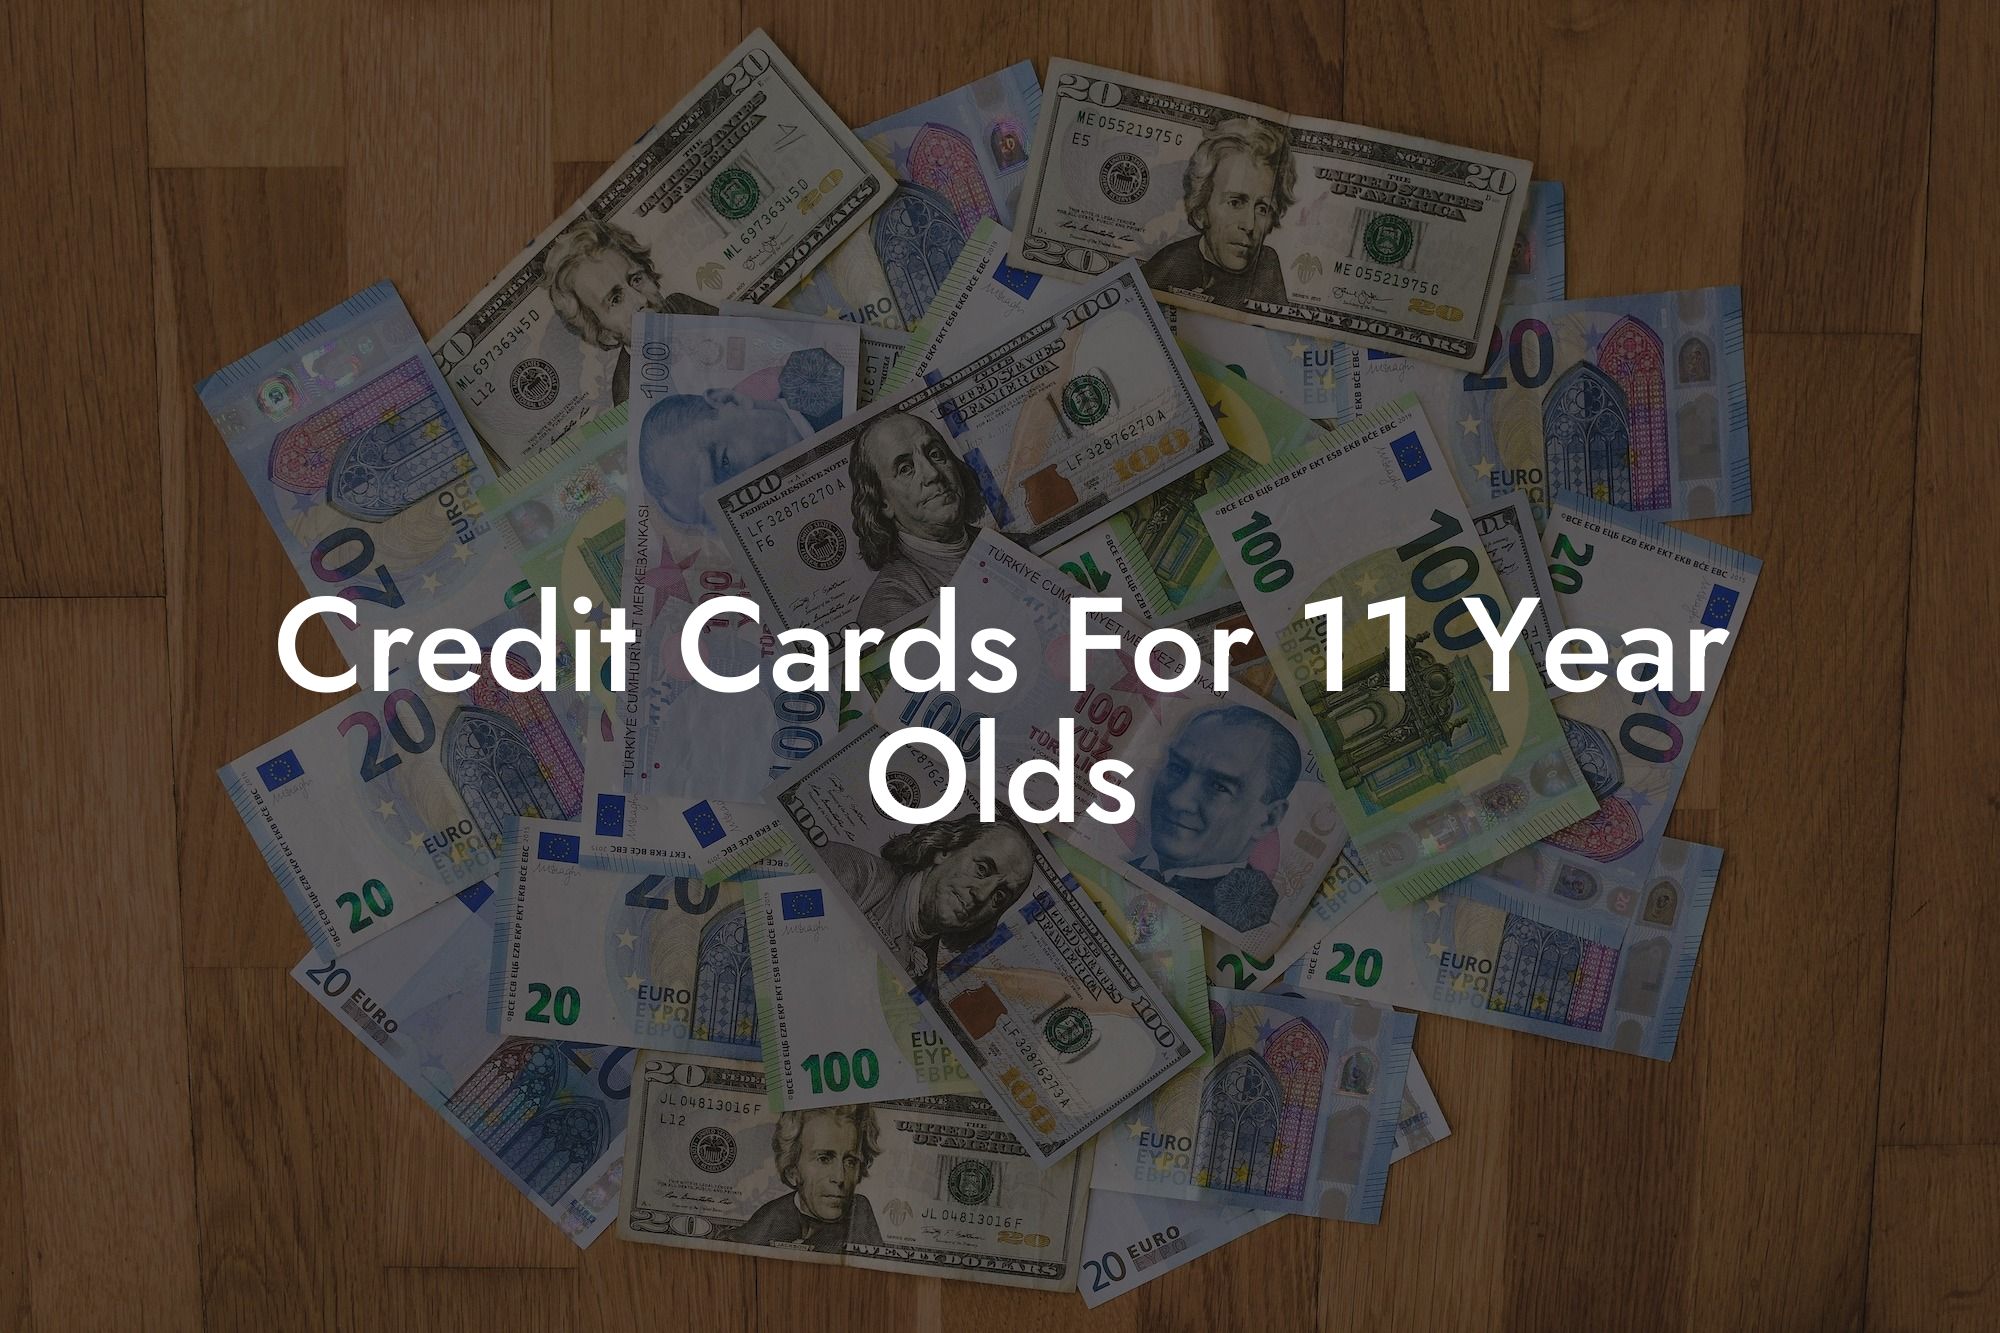 Credit Cards For 11 Year Olds